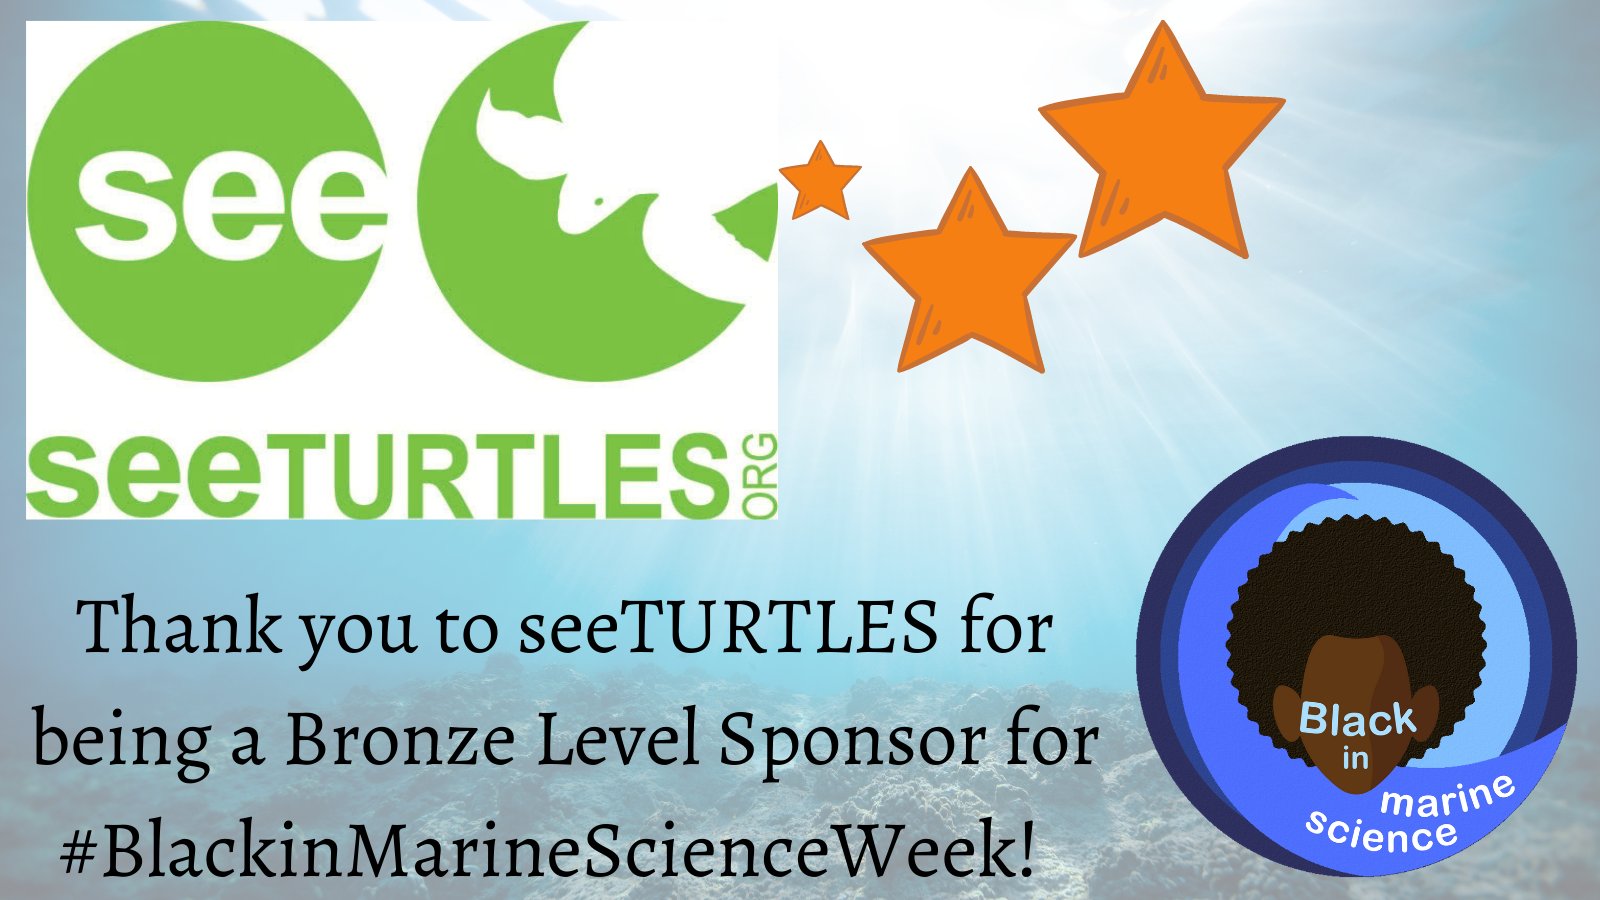 Thank you to SEE Turtles for being a Bronze Level Sponsor for Black in Marine Science Week